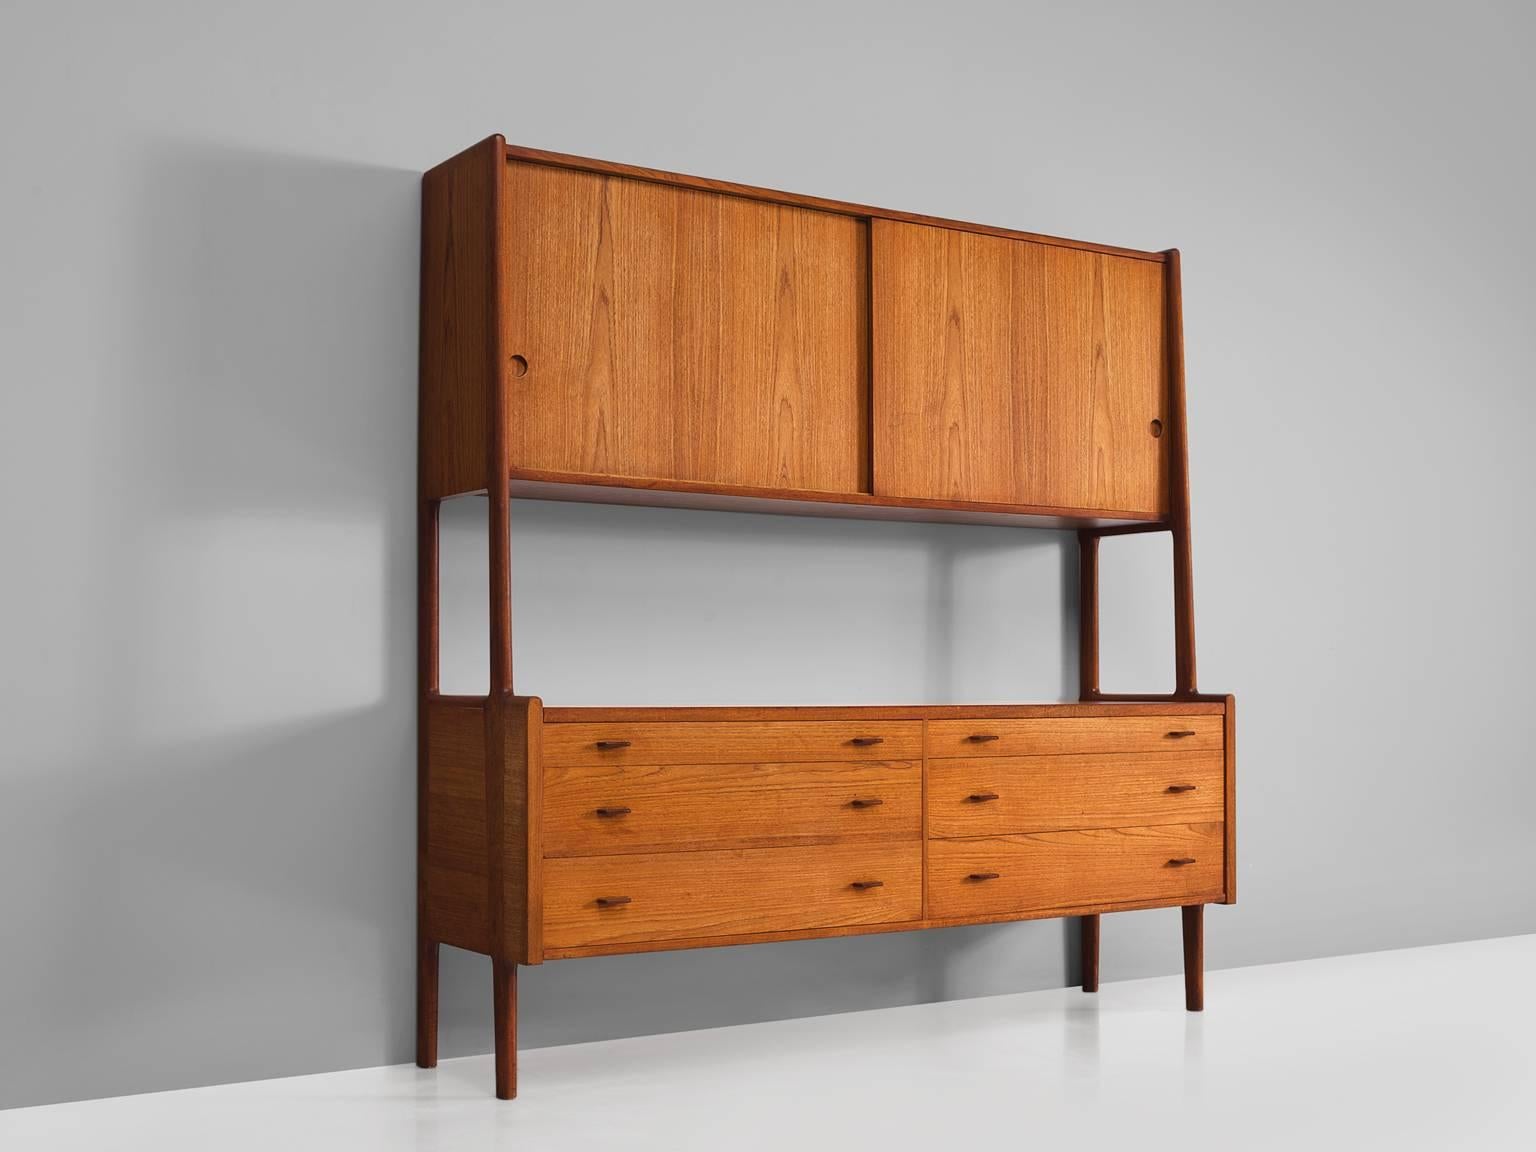 Hans Wegner for Ry Møbler, cabinet RY20, teak, Denmark, 1950s.

This cabinet is executed in teak and is typical for midcentury Scandinavian design. The cabinet features a base with four cylindrical legs that function as connective elements for the